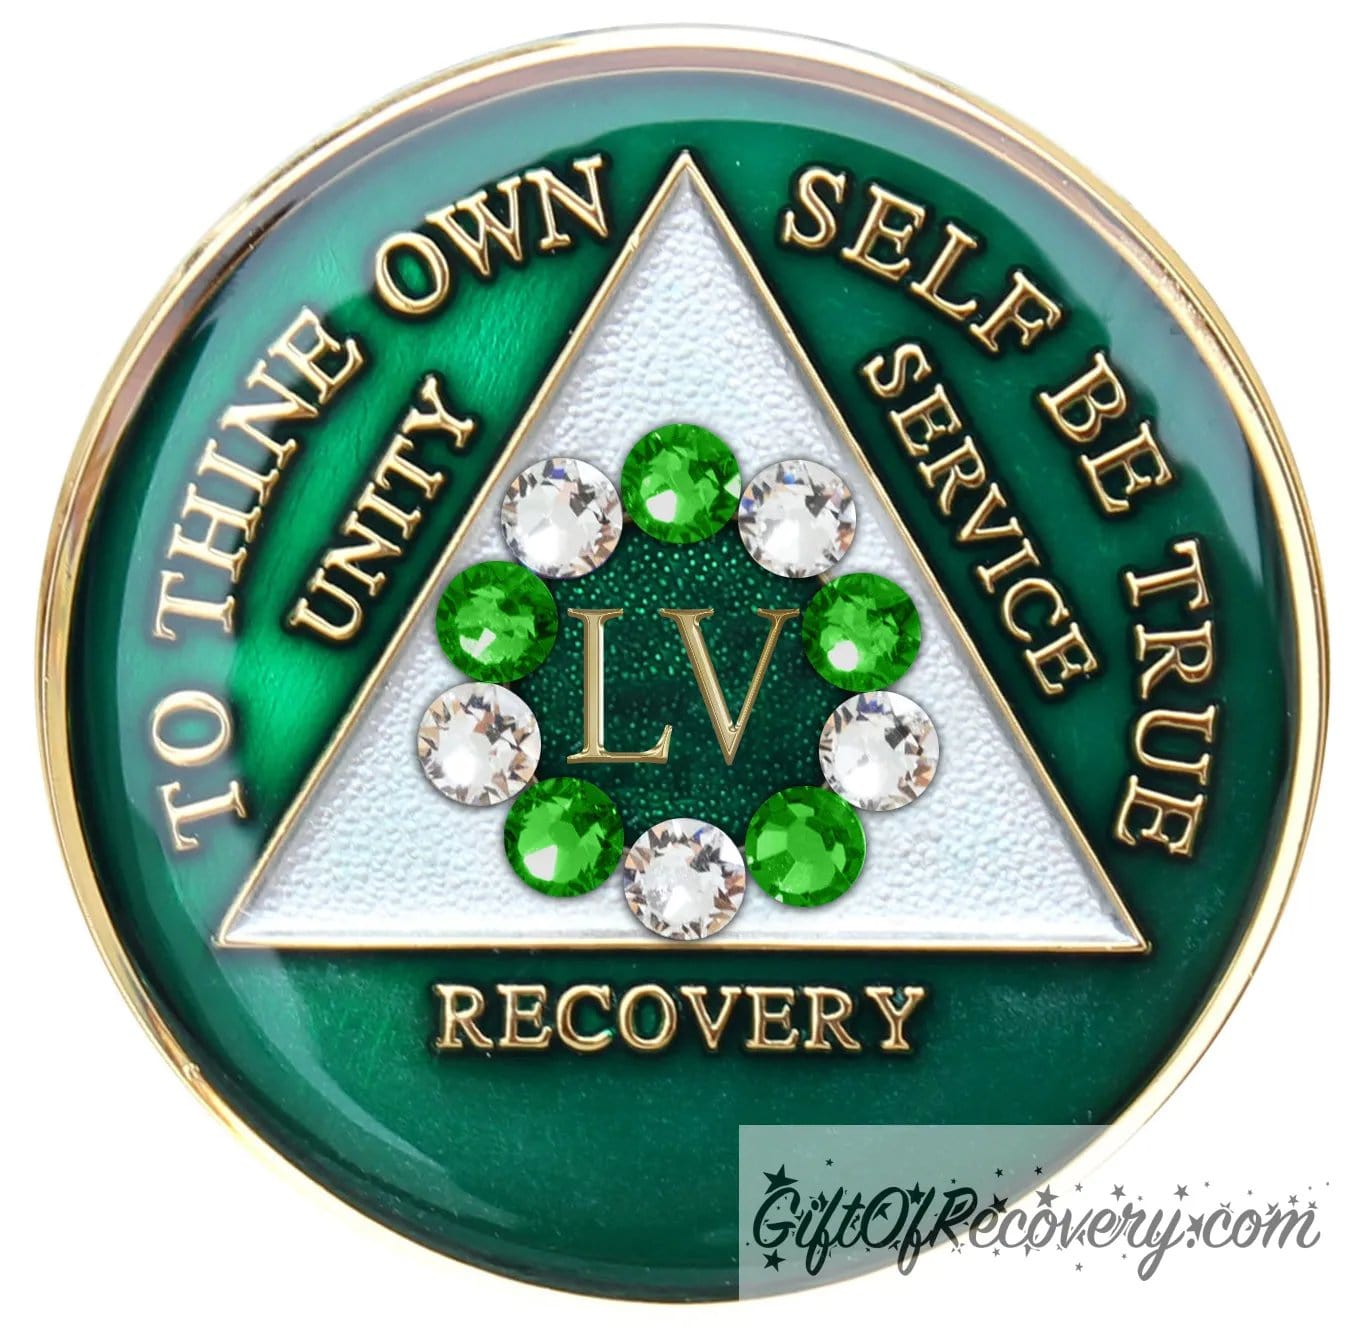 55 year emerald green AA medallion with the 10th step in emphasis in the center, 5 emerald green genuine crystals and 5 clear genuine crystals, inside the triangle is pearl white, while the circle is sparkle green. To thine own self be true, unity, service, recovery, and the roman numeral 1, are 14k gold and sealed with resin for a glossy finish.